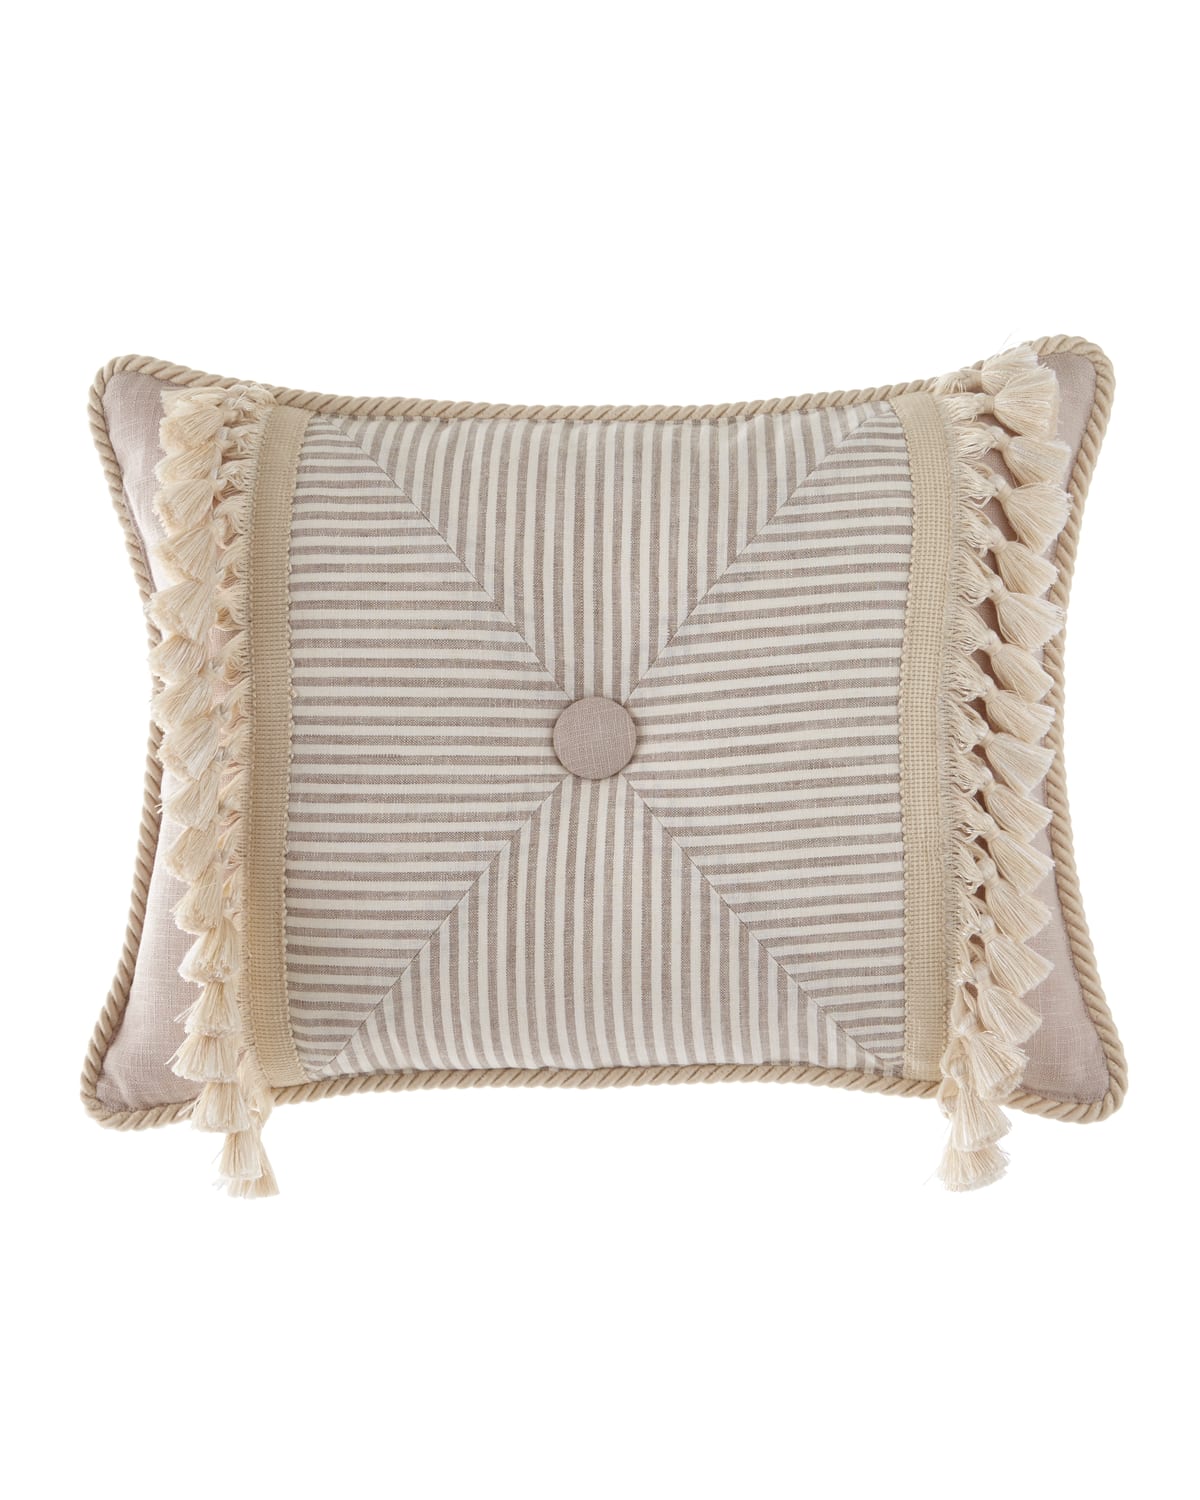 Image Sweet Dreams Paloma Pieced Oblong Pillow